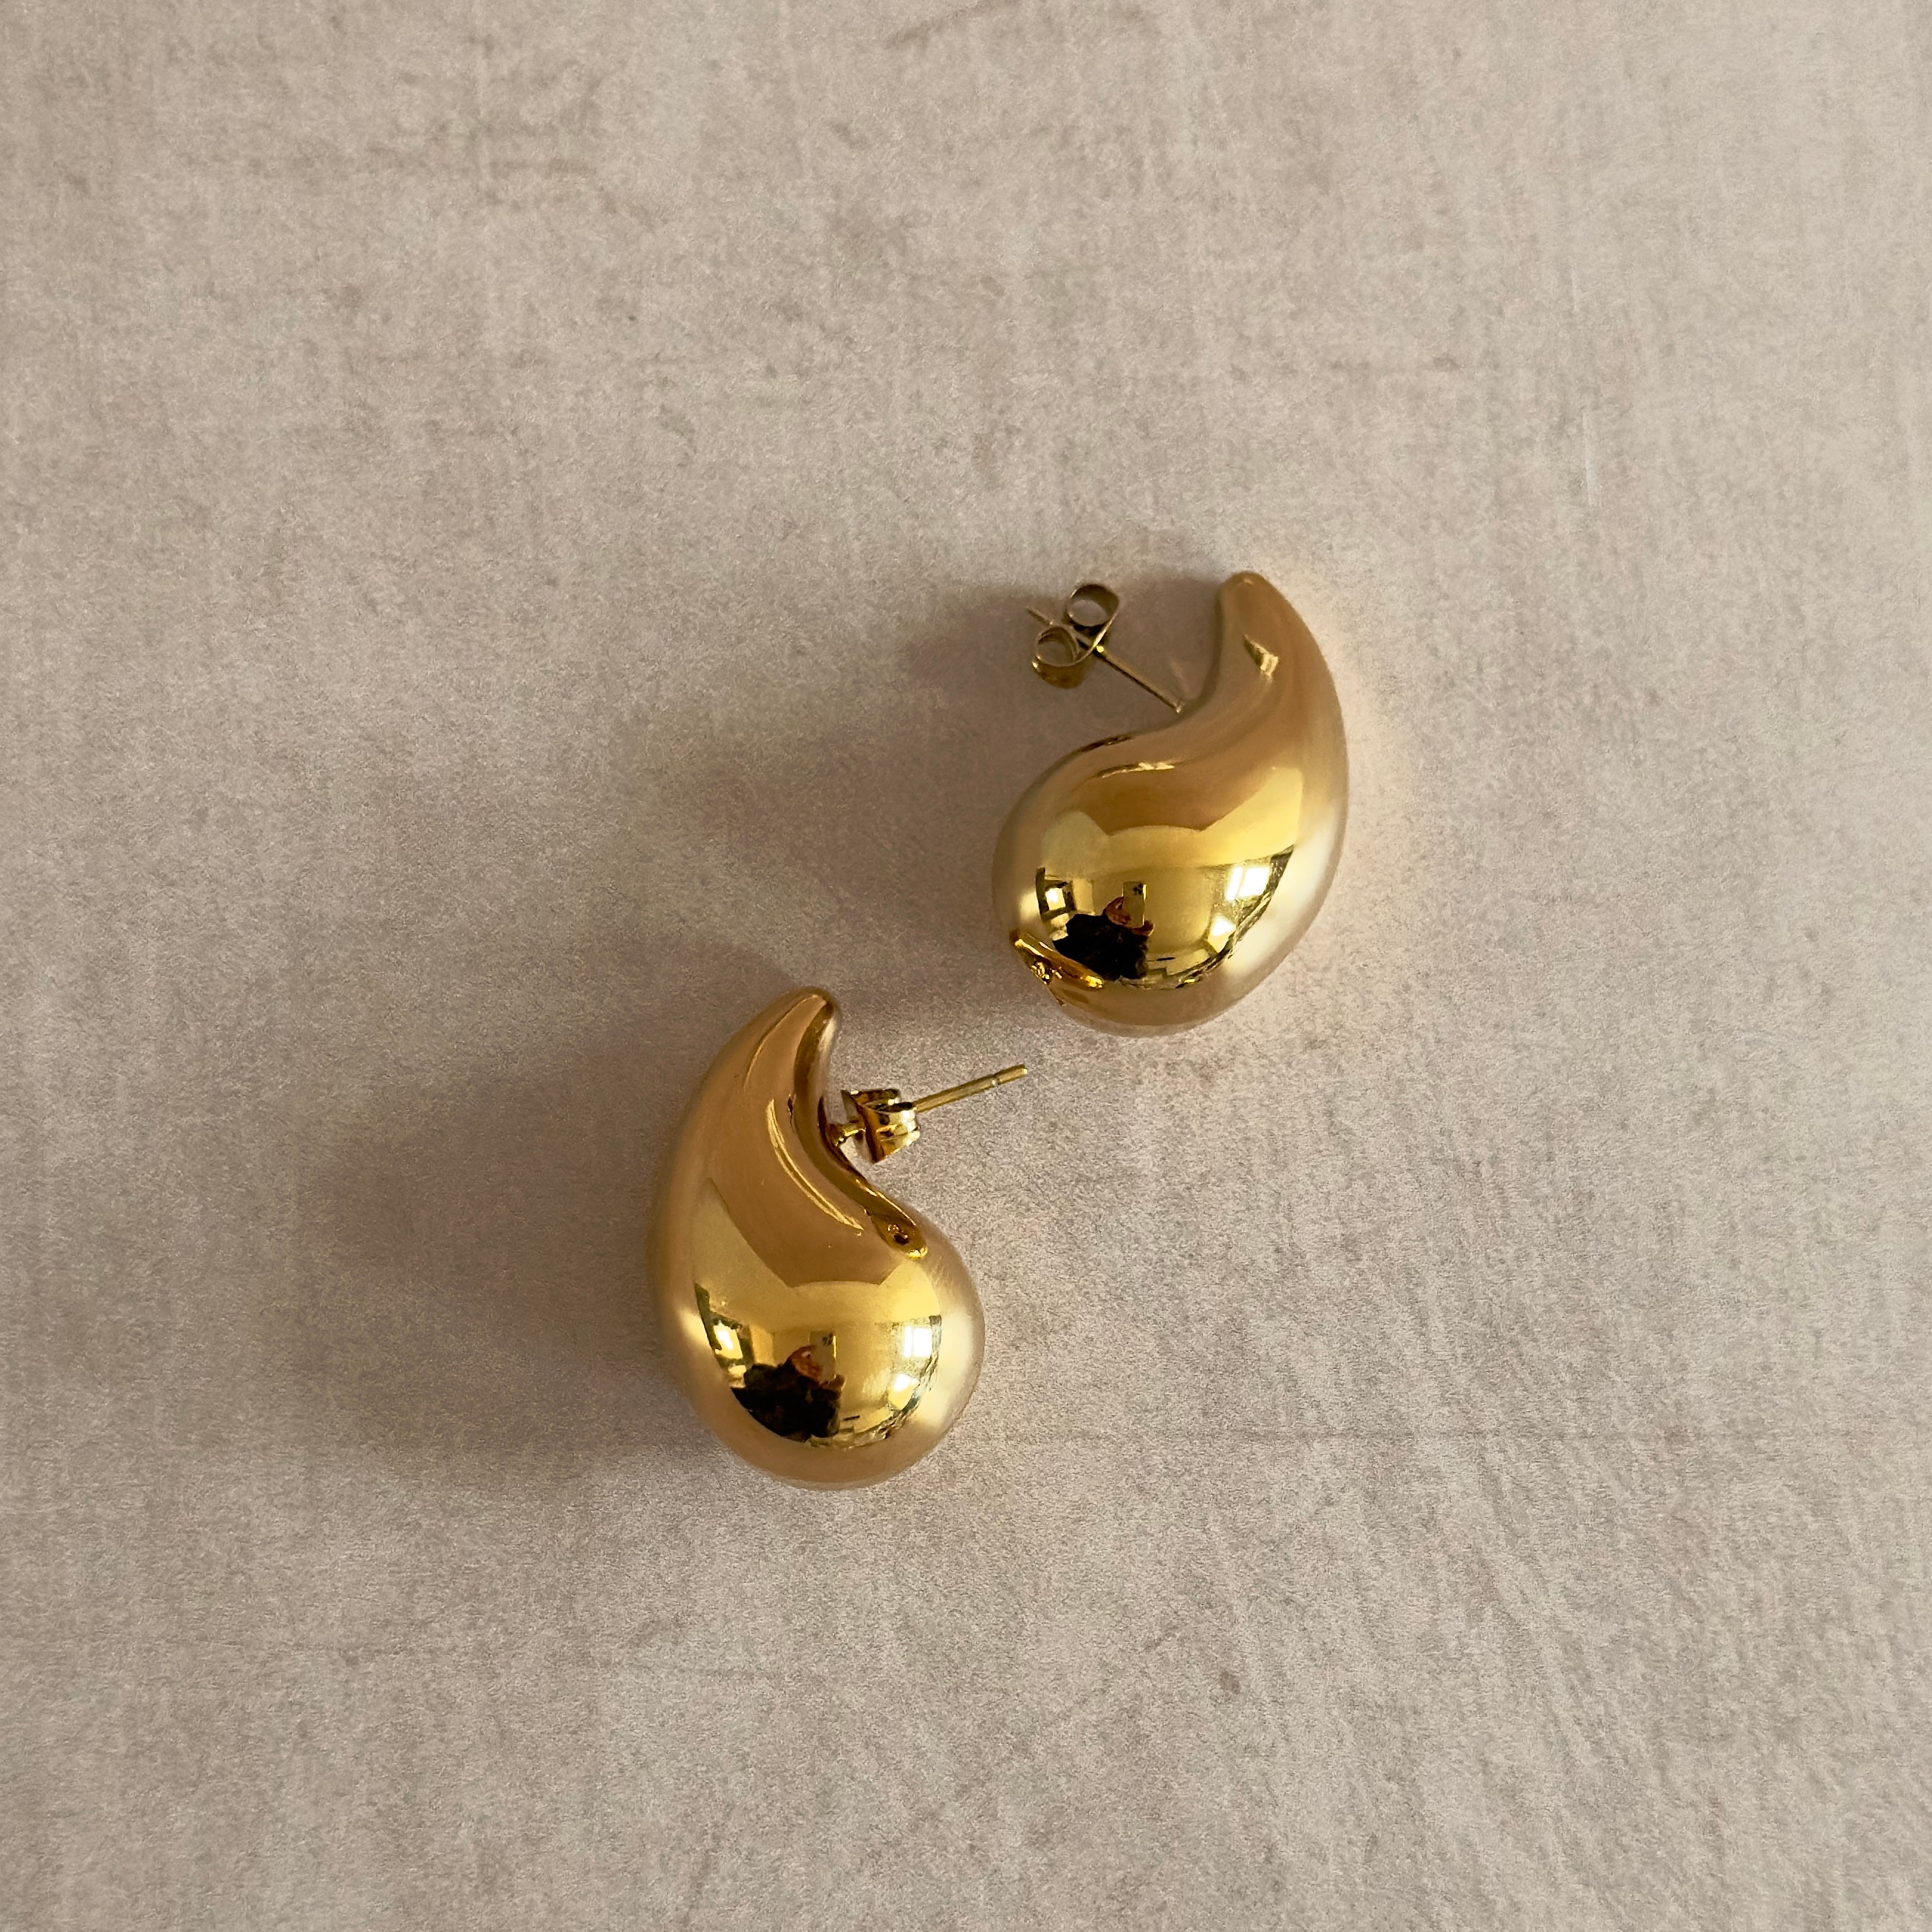 Introducing Lola Teardrop Earrings: A timeless teardrop design, these 18k gold plated earrings are perfect for adding a touch of luxury to any outfit. Their elegant brushed finish gives them a regal, sophisticated look that will turn heads and elevate any ensemble.